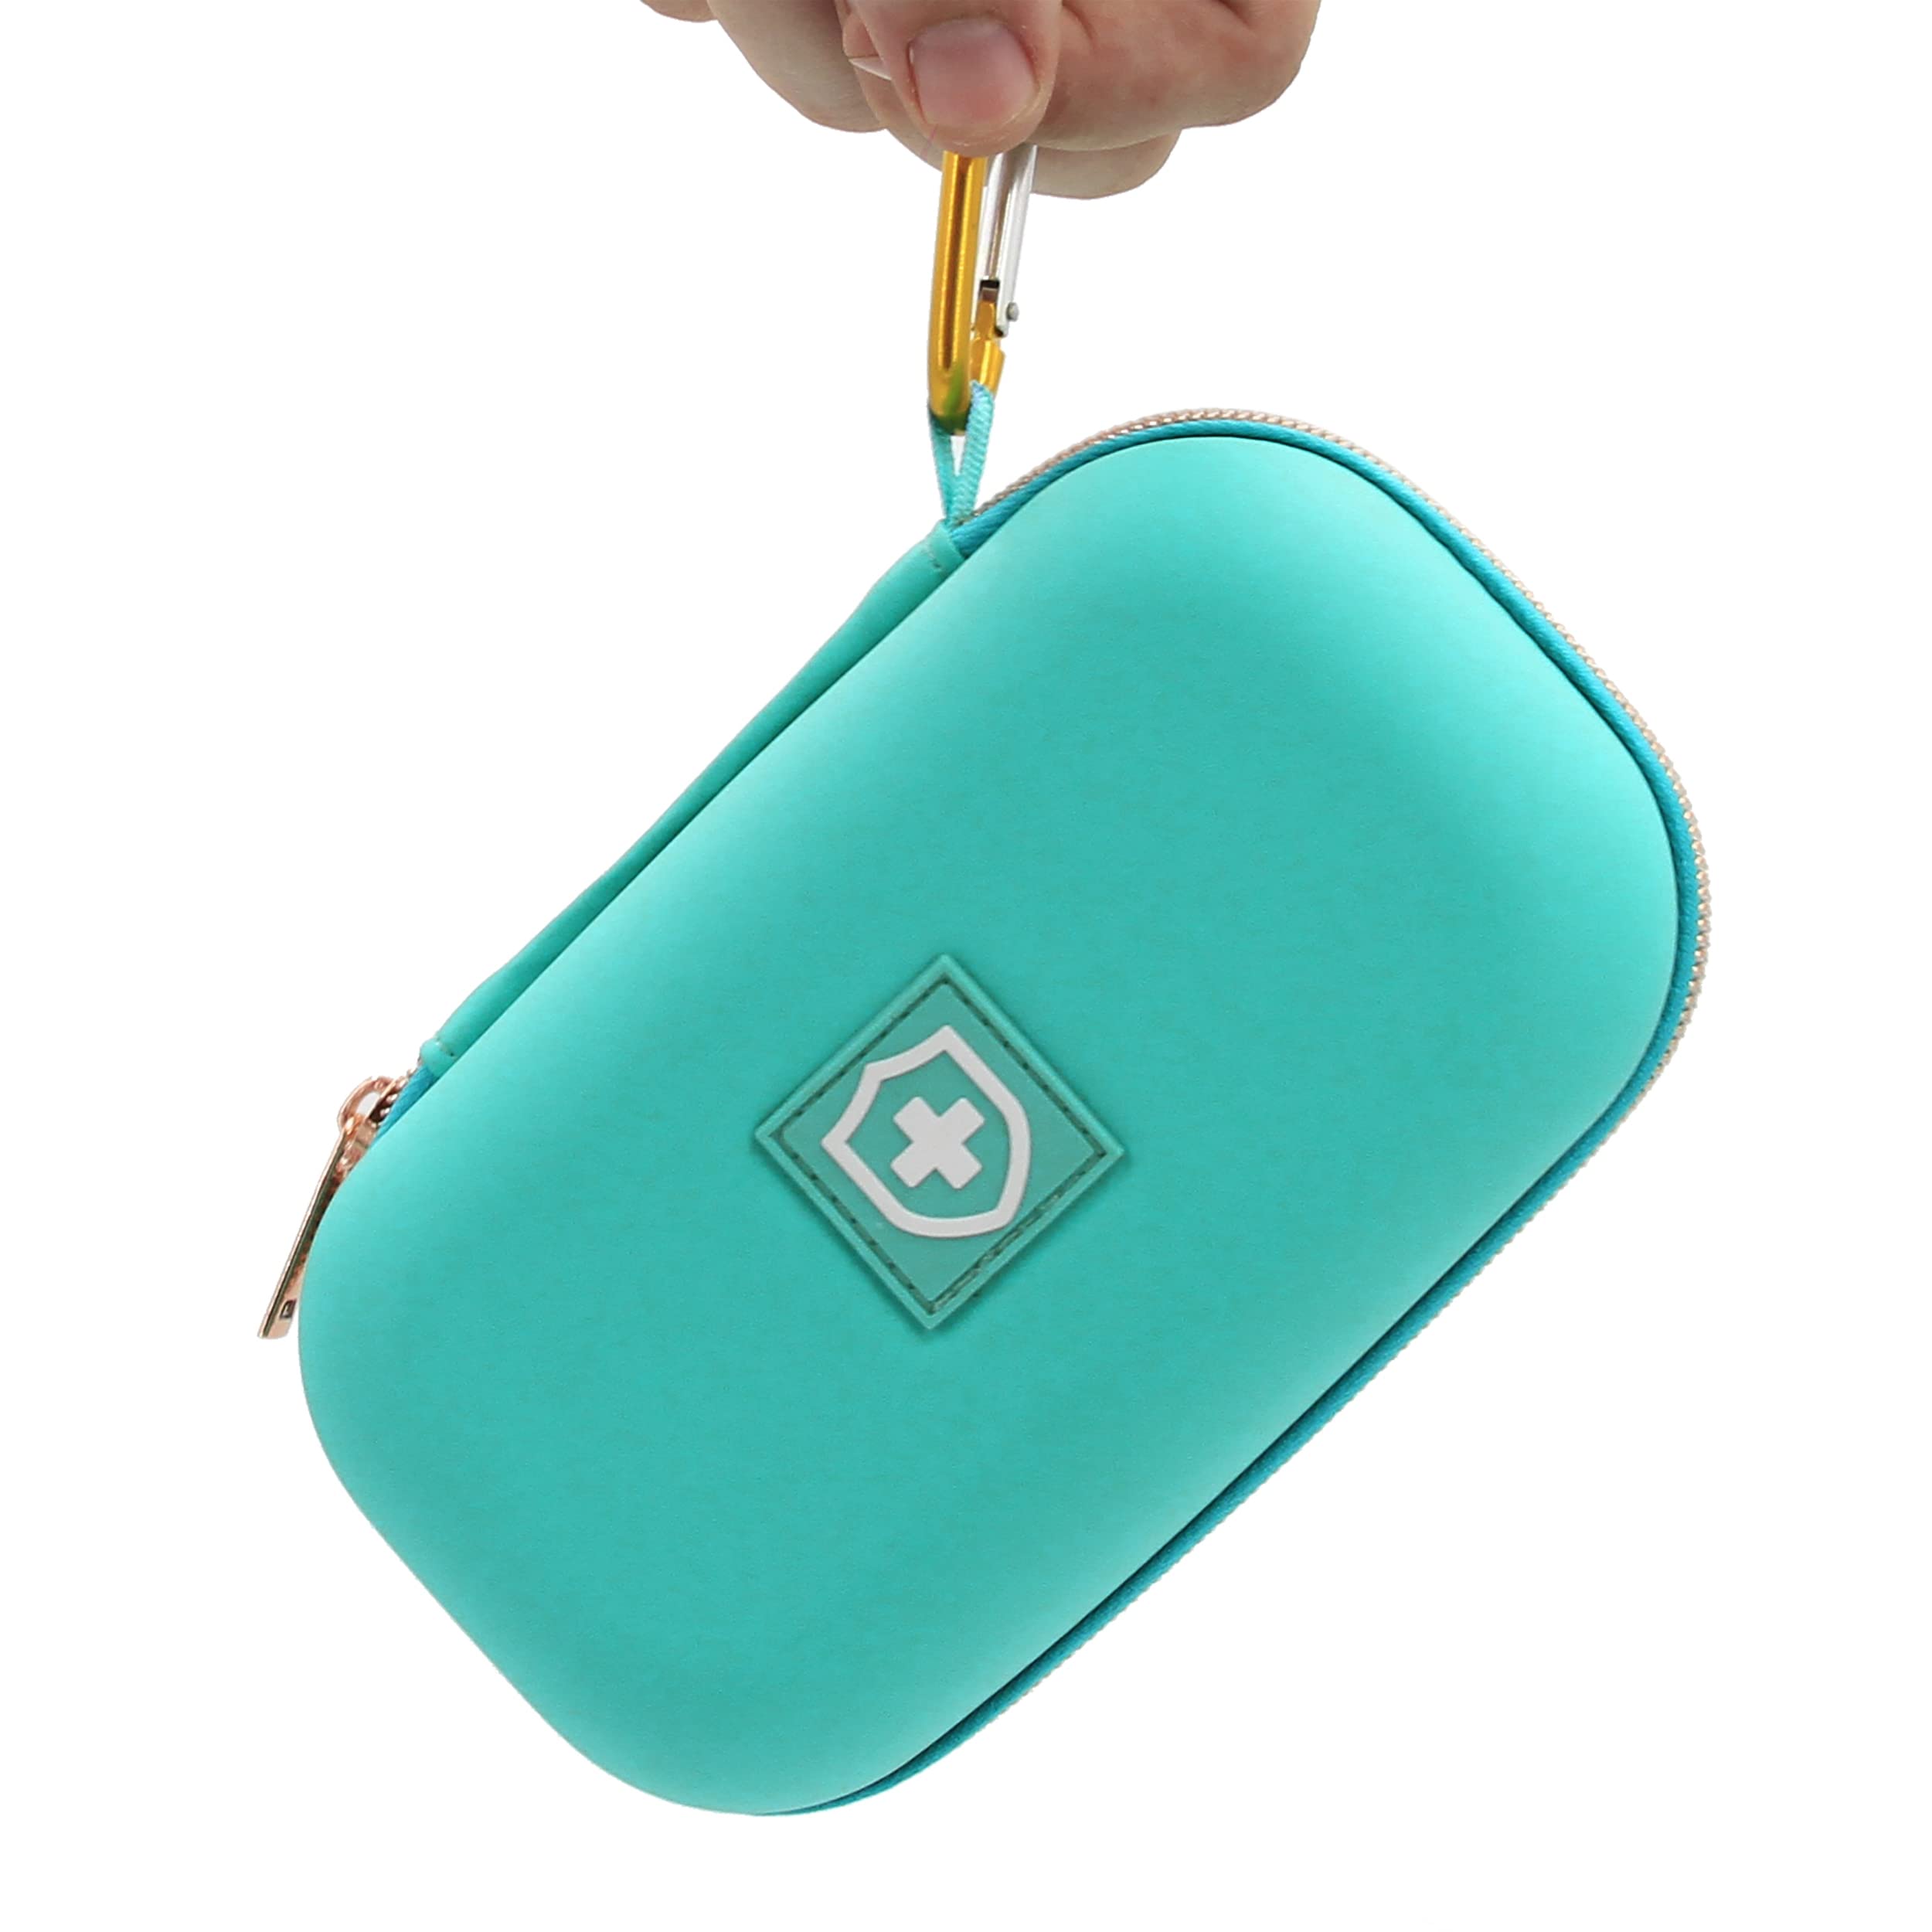 CASEMATIX Turquoise Asthma Inhaler Case for Travel Fits Spacer , Mask and Accessories, Includes Case Only